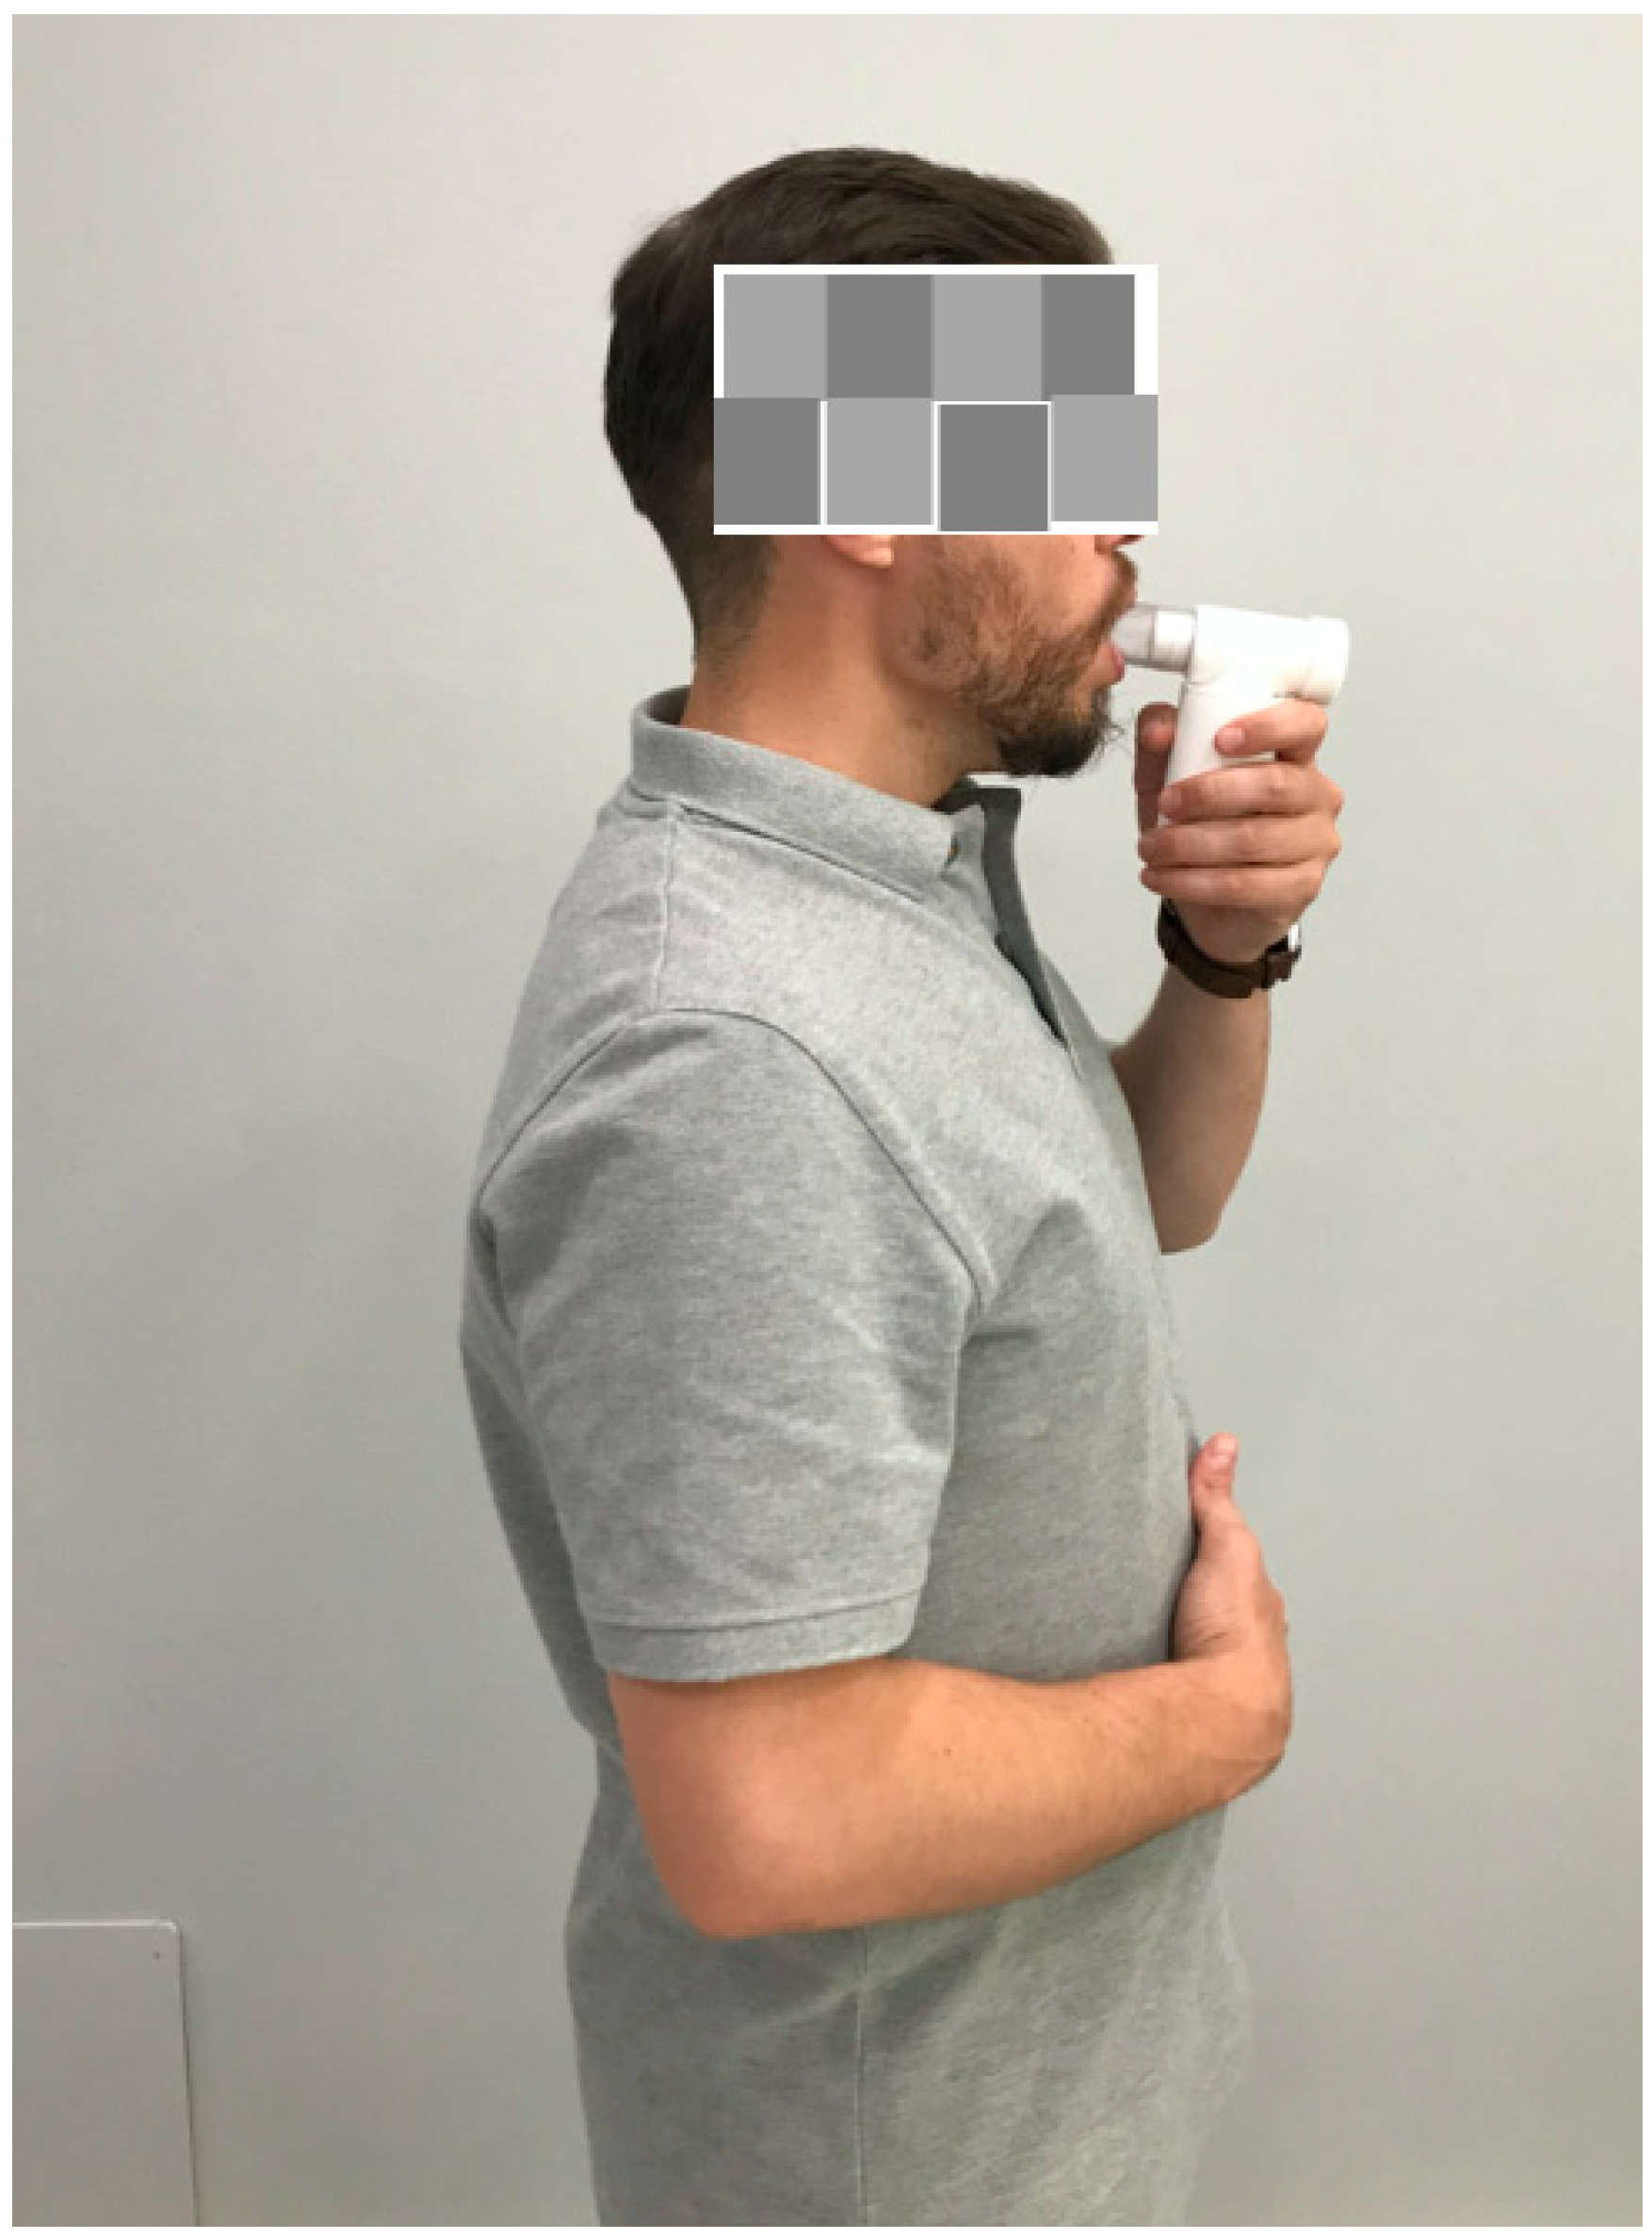 JCM Free Full-Text Effectiveness of Ultrasonography Visual Biofeedback of the Diaphragm in Conjunction with Inspiratory Muscle Training on Muscle Thickness, Respiratory Pressures, Pain, Disability, Quality of Life and Pulmonary Function pic